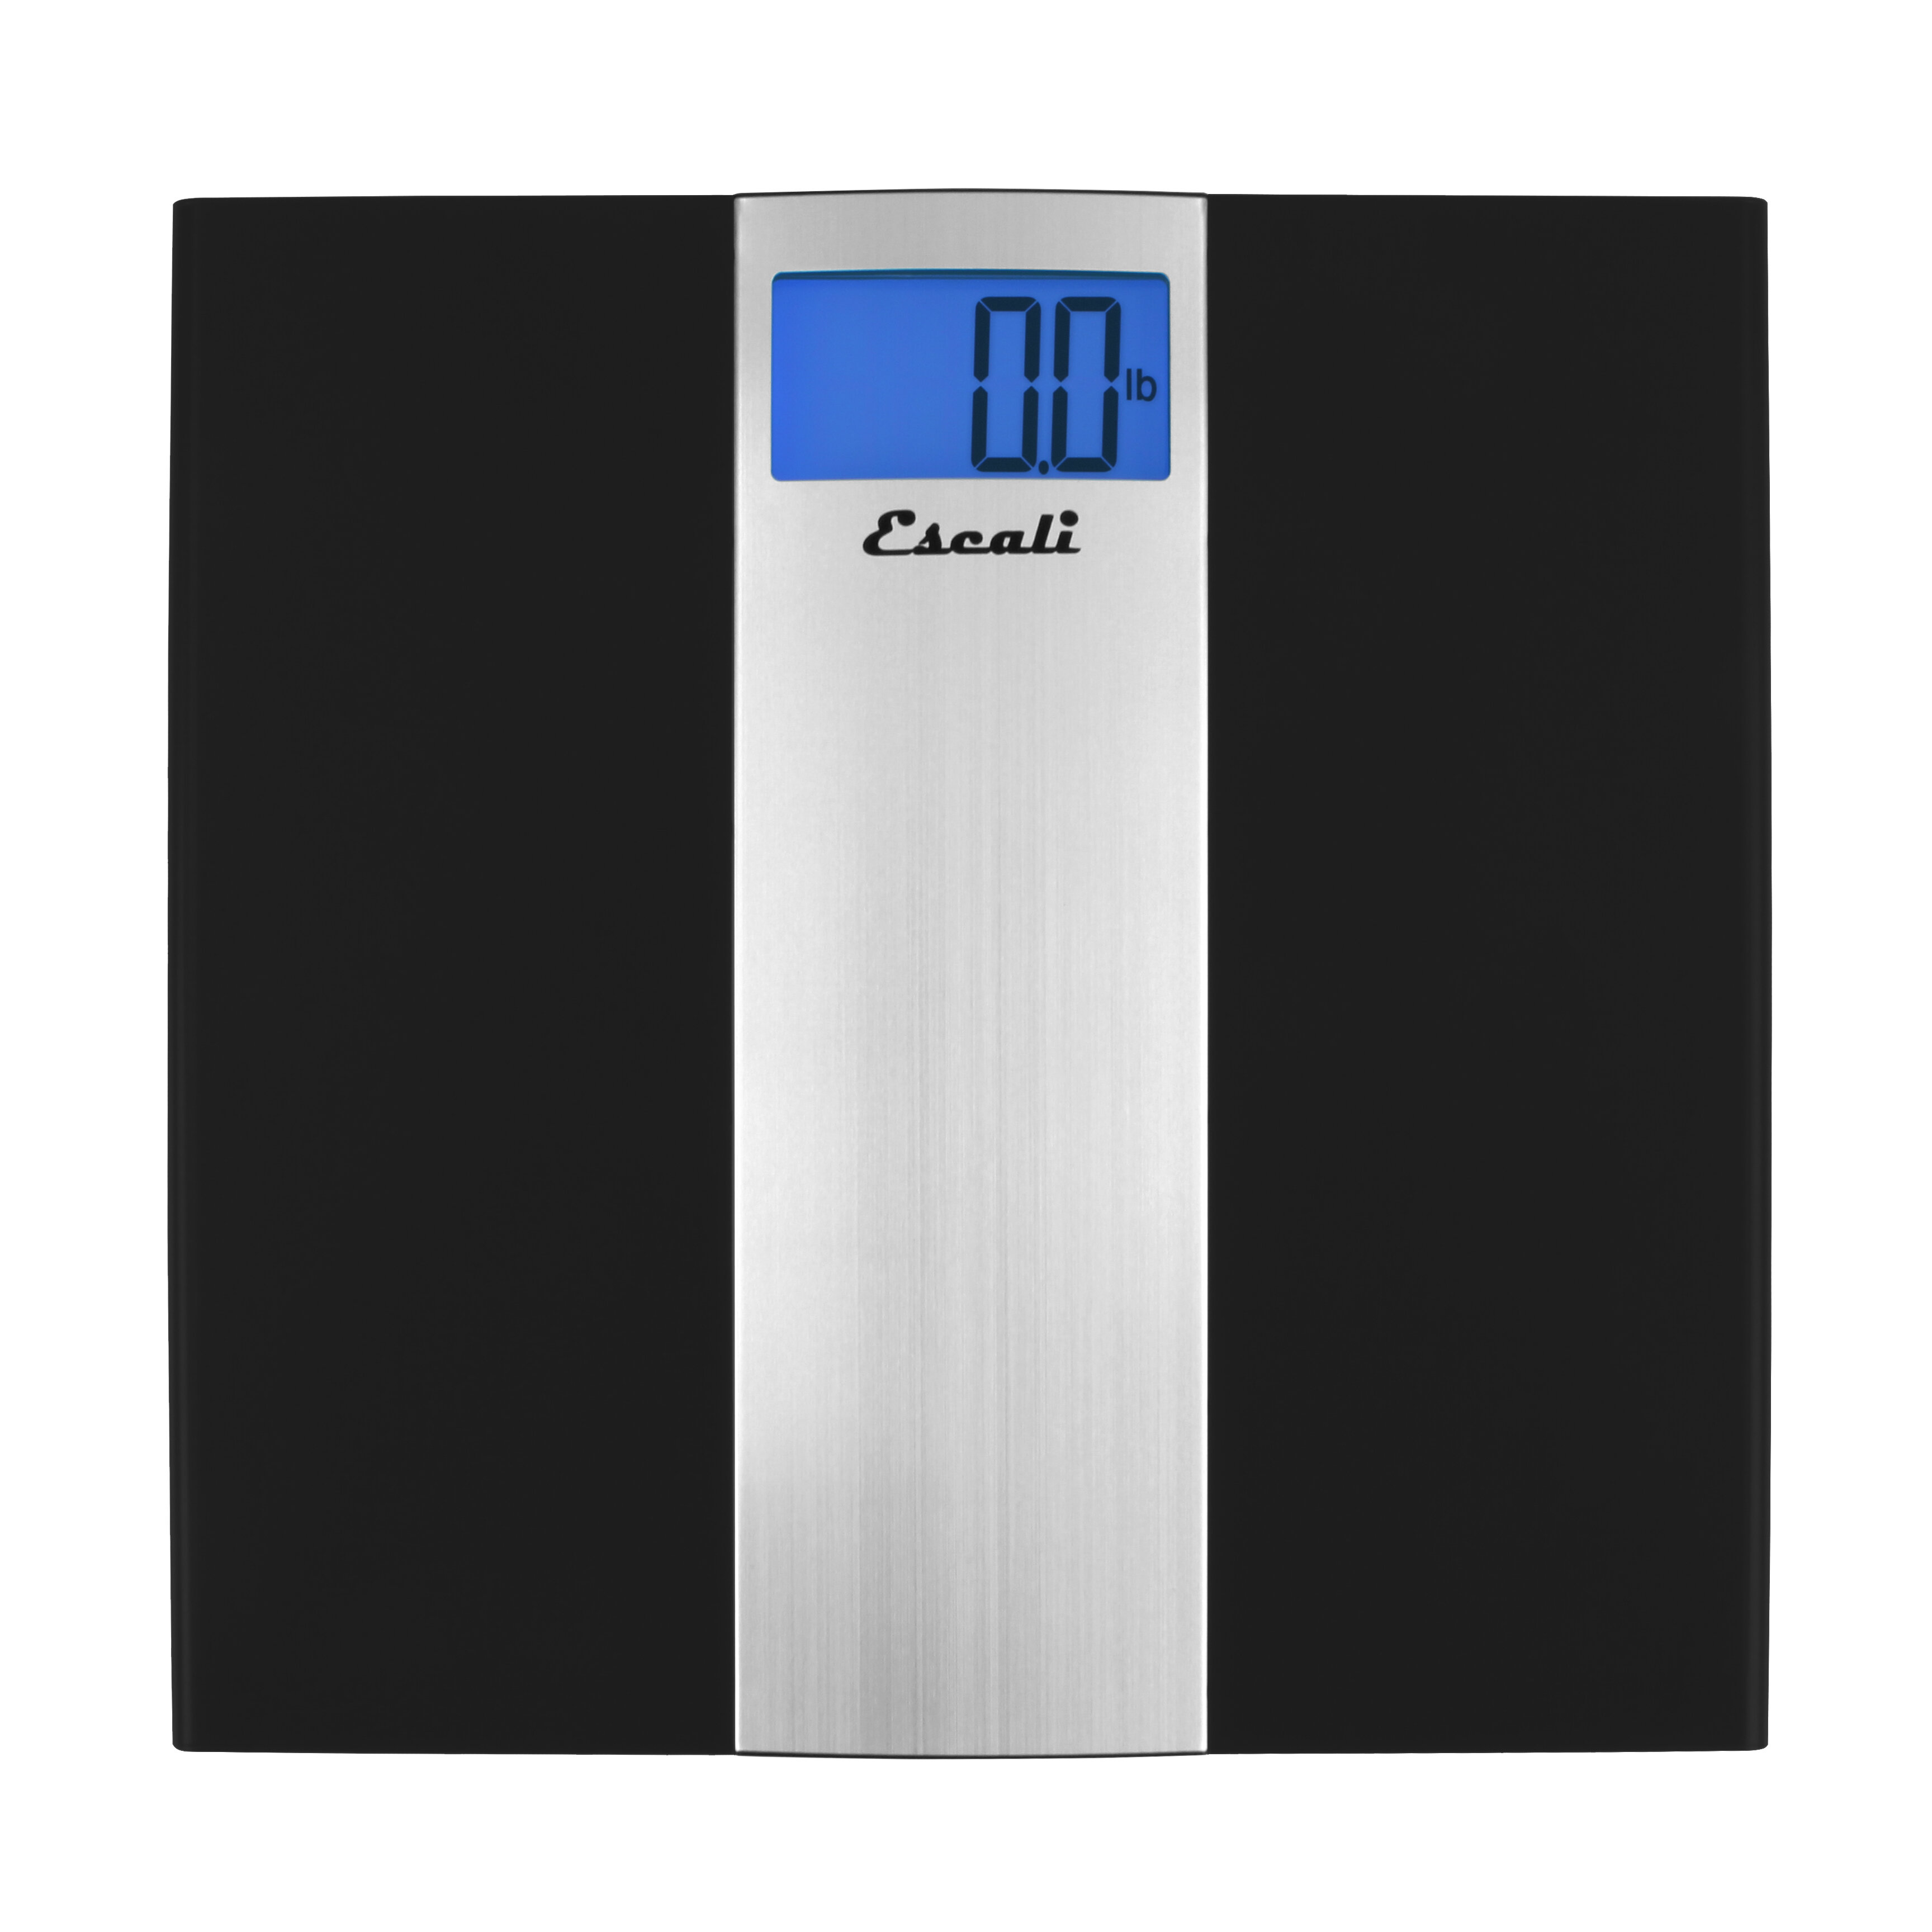 Salter Pro-Helix Professional Oversized Bathroom Scale with Black